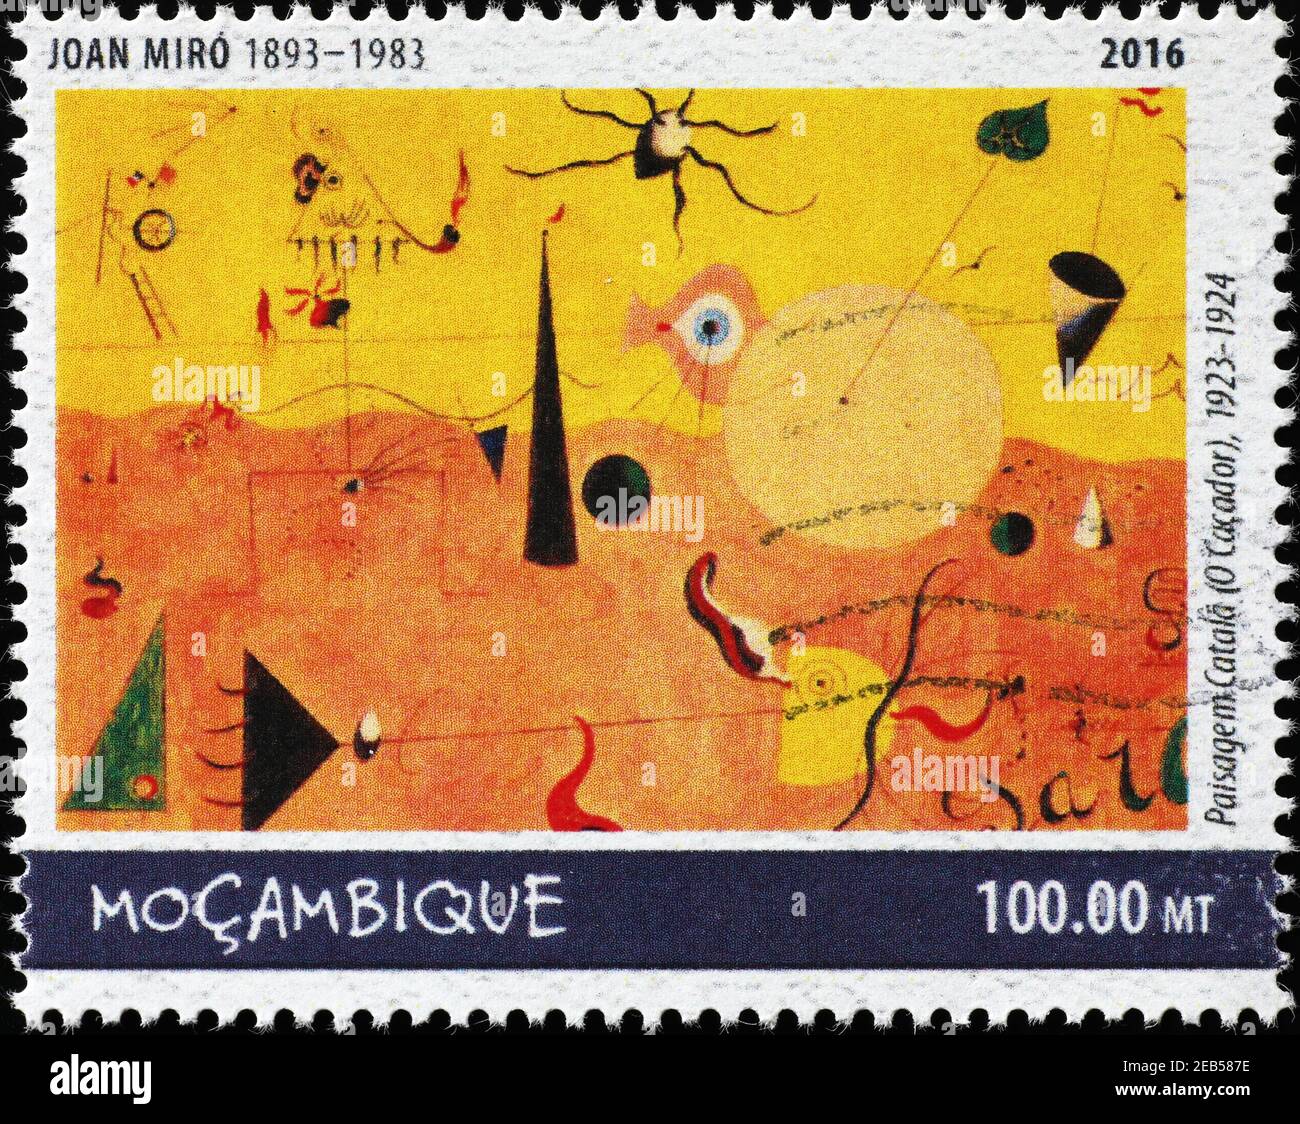 Painting by Joan Mirò on postage stamp Stock Photo